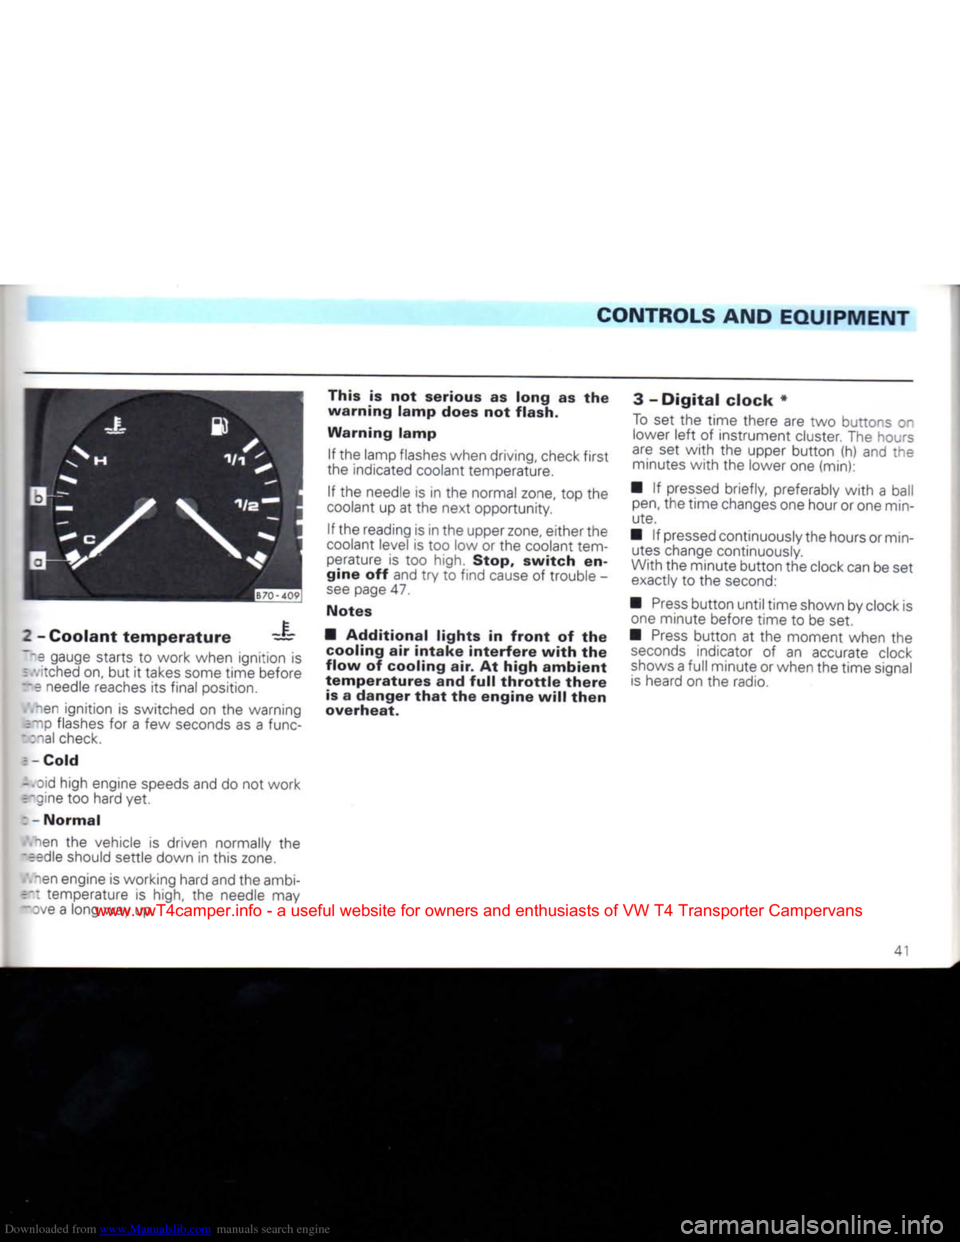 VOLKSWAGEN TRANSPORTER 1992 T4 / 4.G Owners Manual Downloaded from www.Manualslib.com manuals search engine 
CONTROLS AND EQUIPMENT 

2
 -
 Coolant temperature
 — 
~~s
 gauge starts
 to
 work
 when ignition
 is 
 =
 .vitched on,
 but it
 takes some 